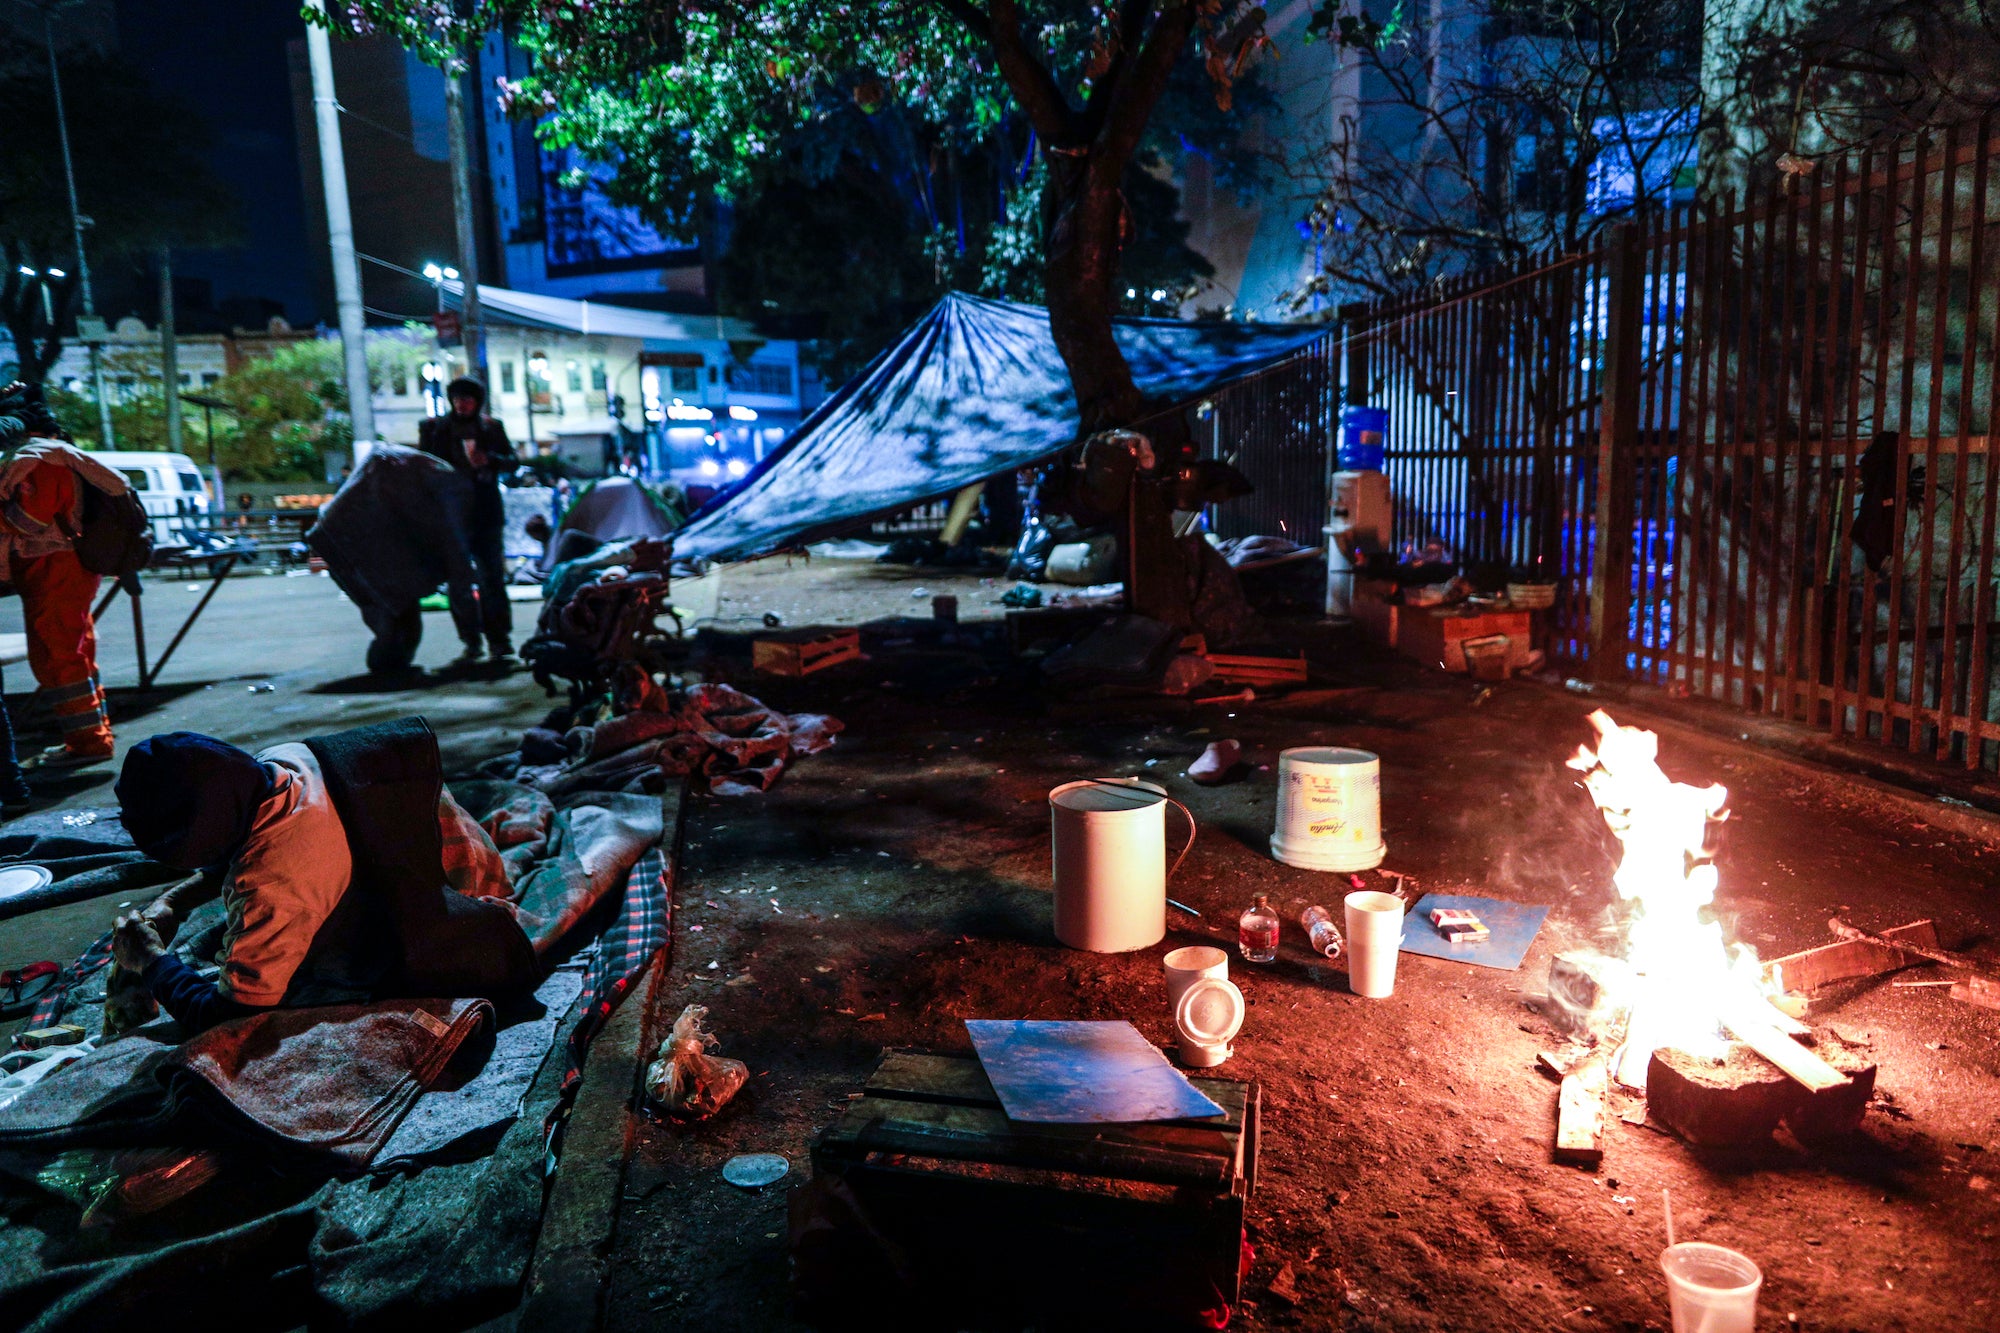 Unhoused people light a fire to stay warm during a cold night in Sao Paulo, Brazil, Thursday, July 29, 2021. (Photo: Marcelo Chello, AP)